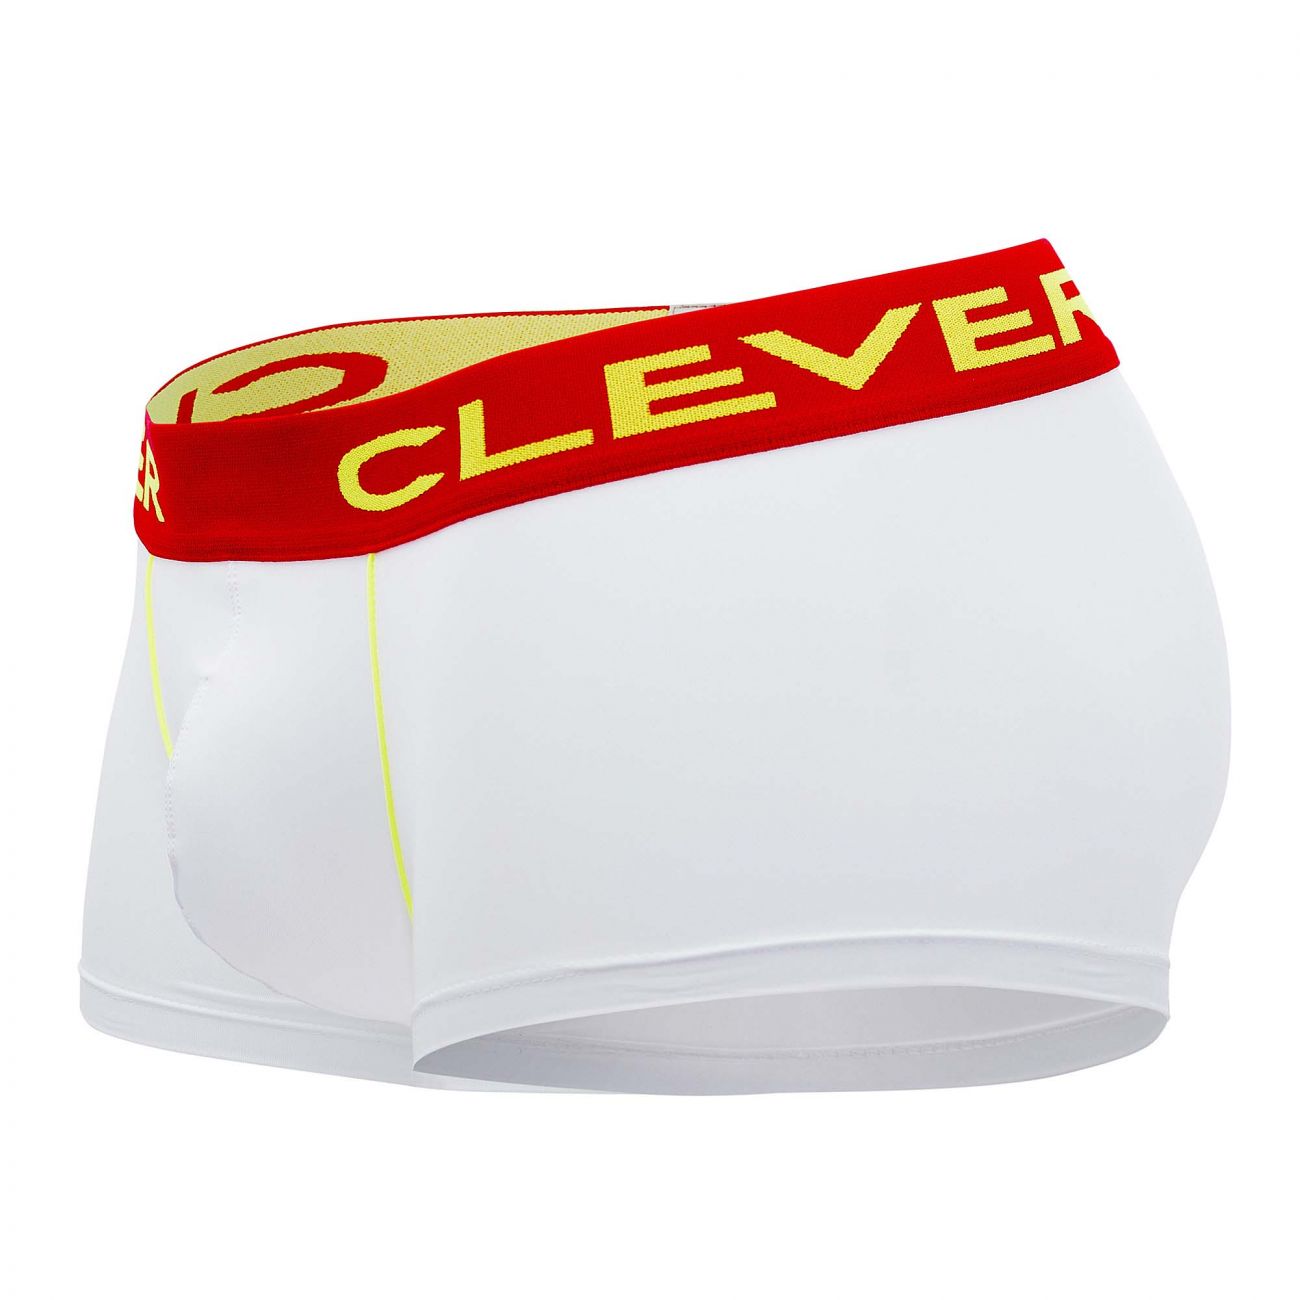 Clever 0363 Trend Trunks Color White